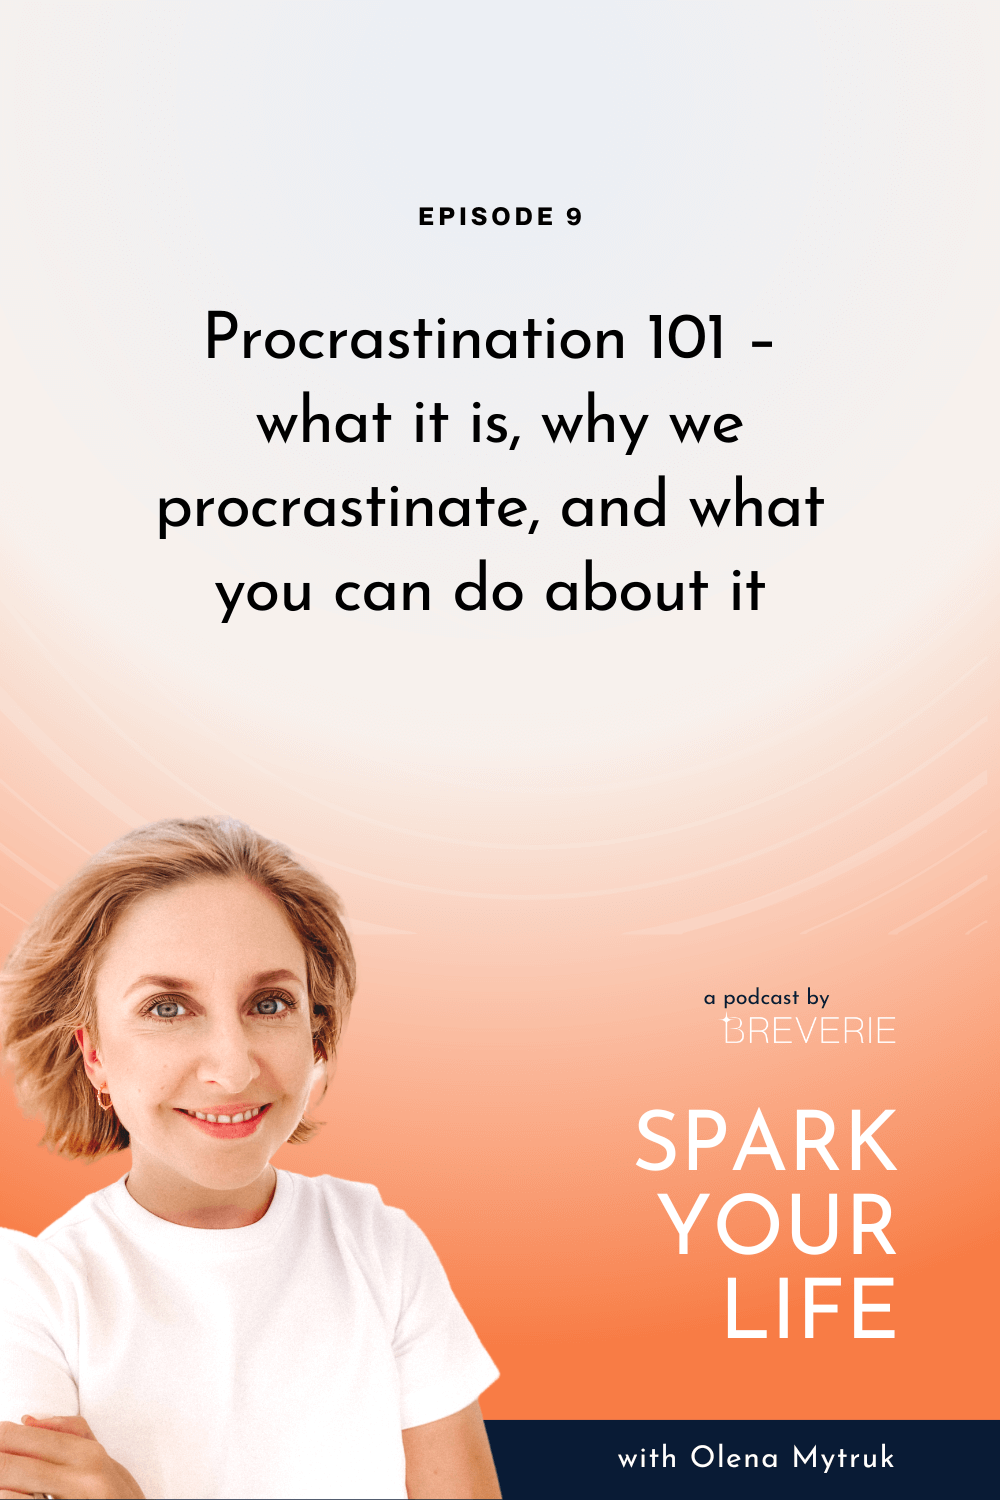 Spark Your Life Podcast | Olena Mytruk | Procrastination 101 – what it really is, why we procrastinate, and what you can do about it